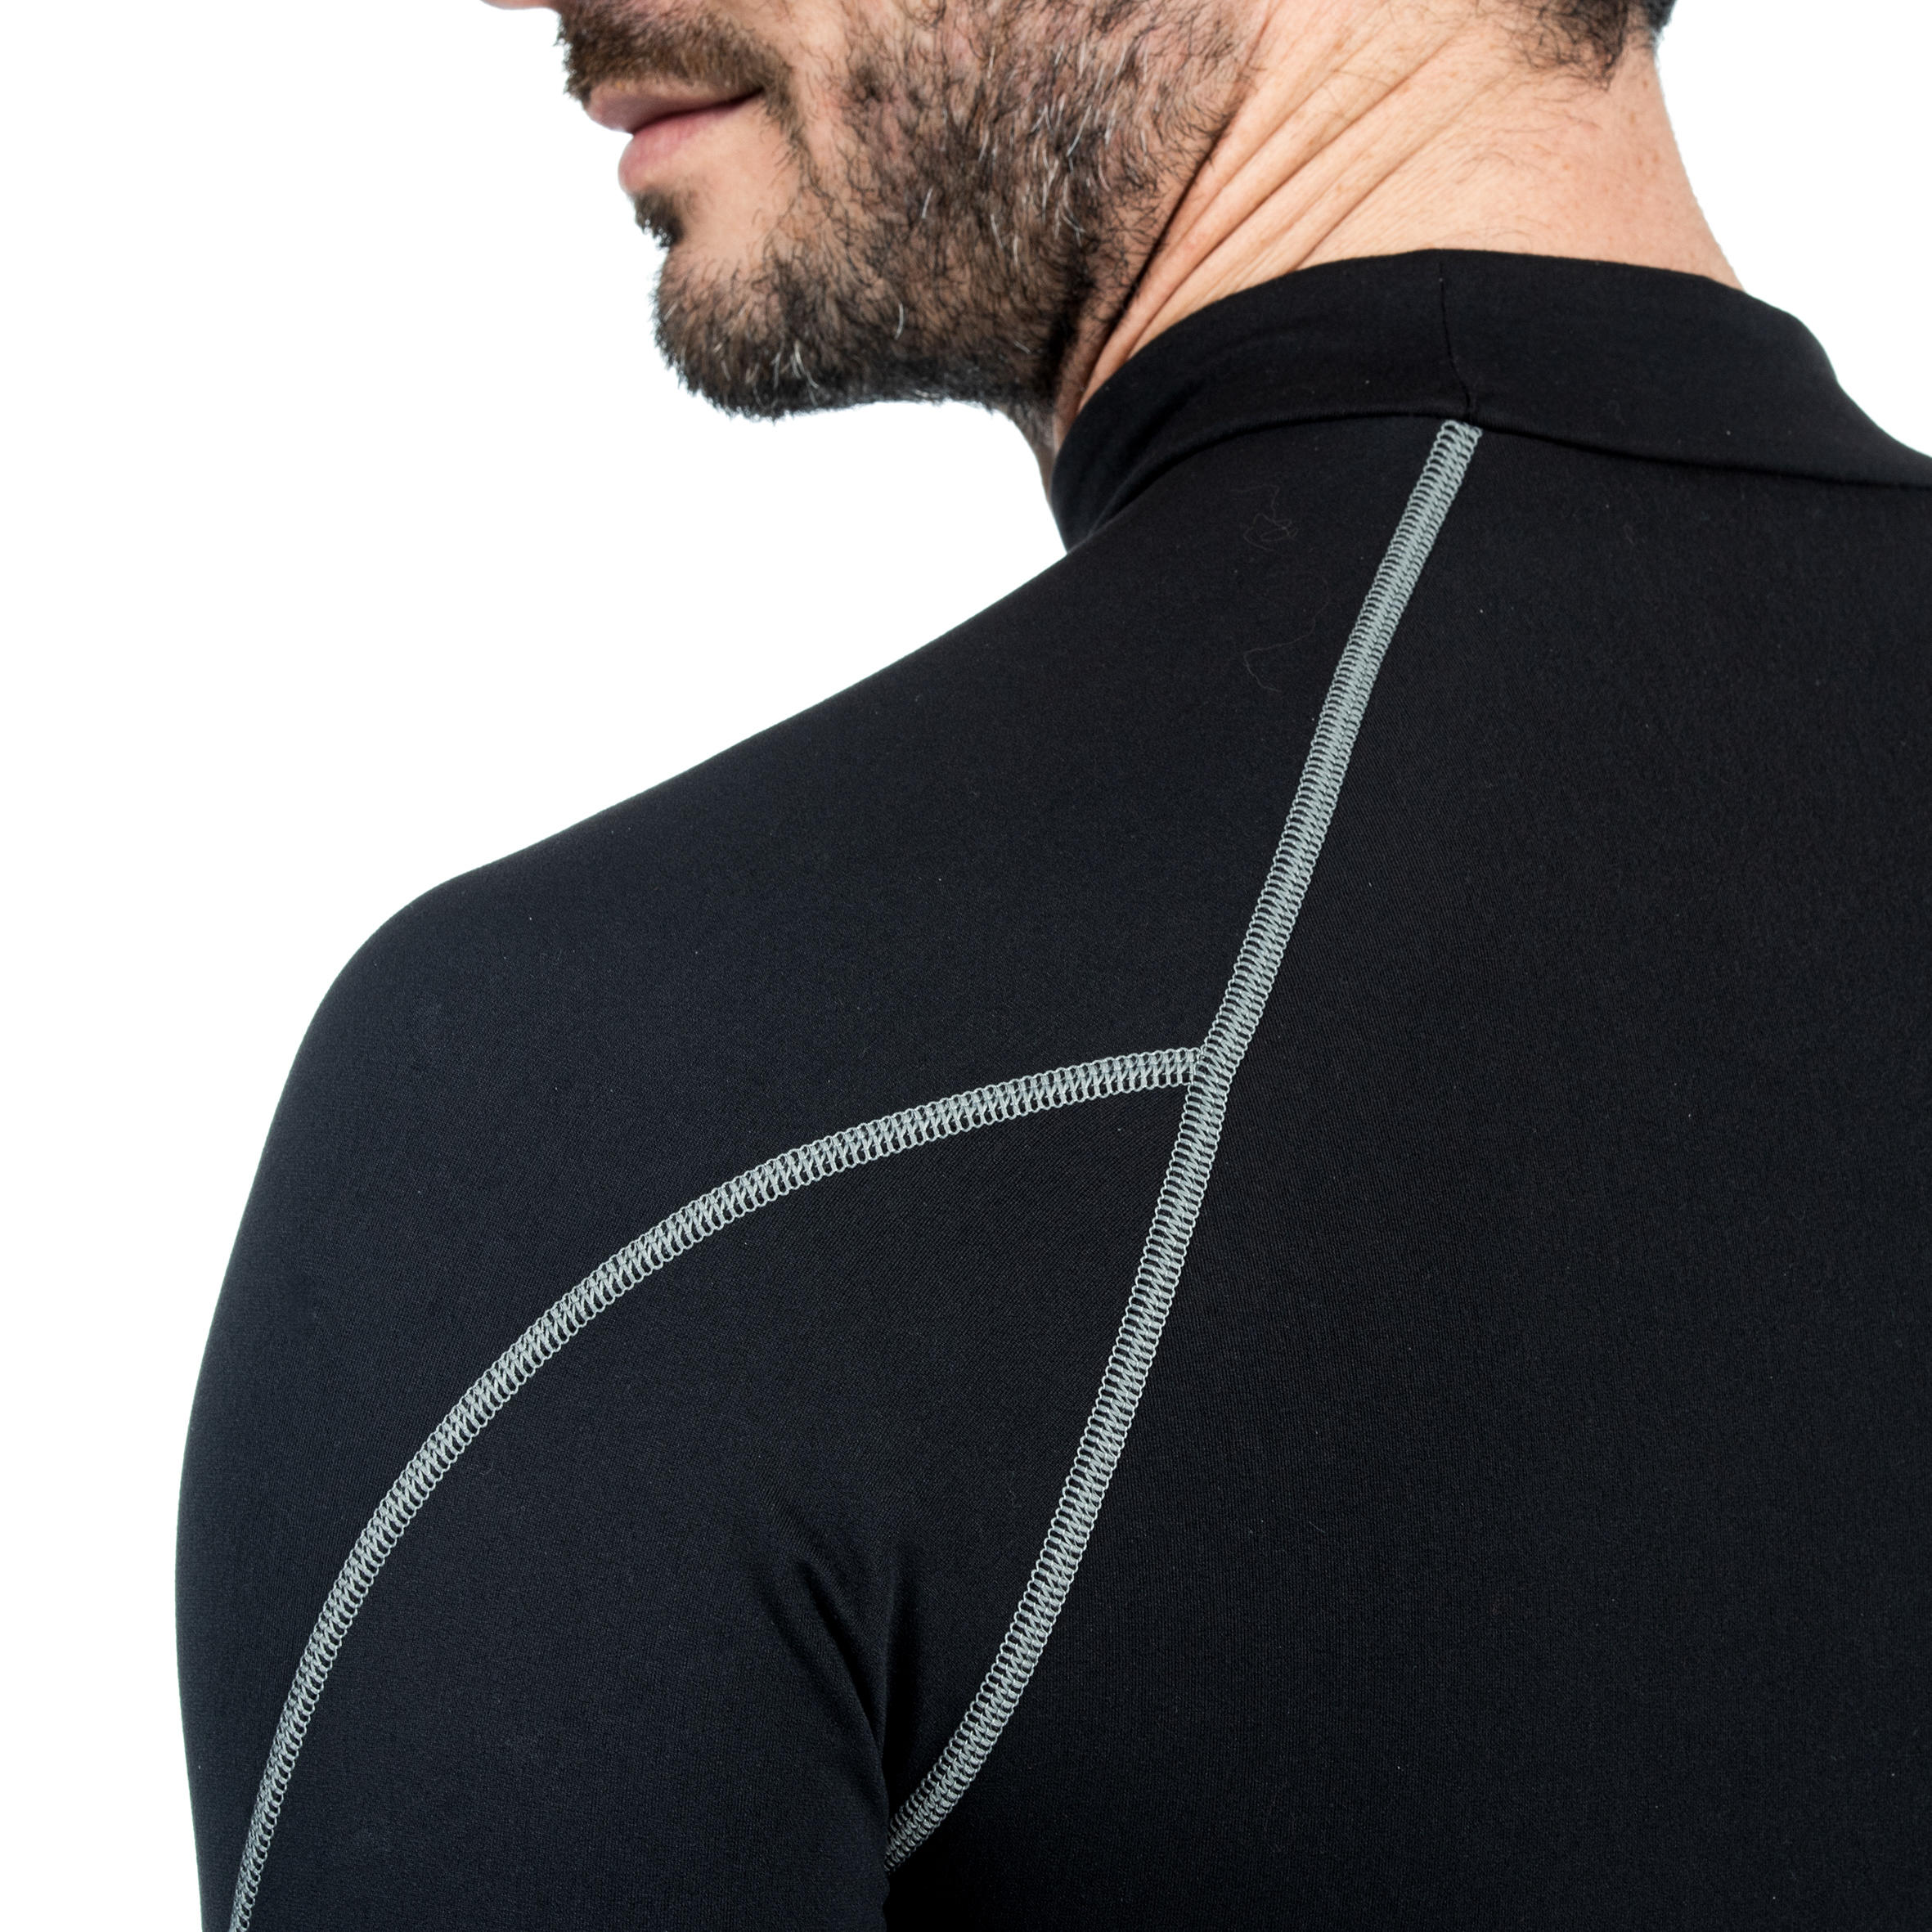 Men's Long-Sleeved Rugby Base Layer Top R500 - Black 5/10